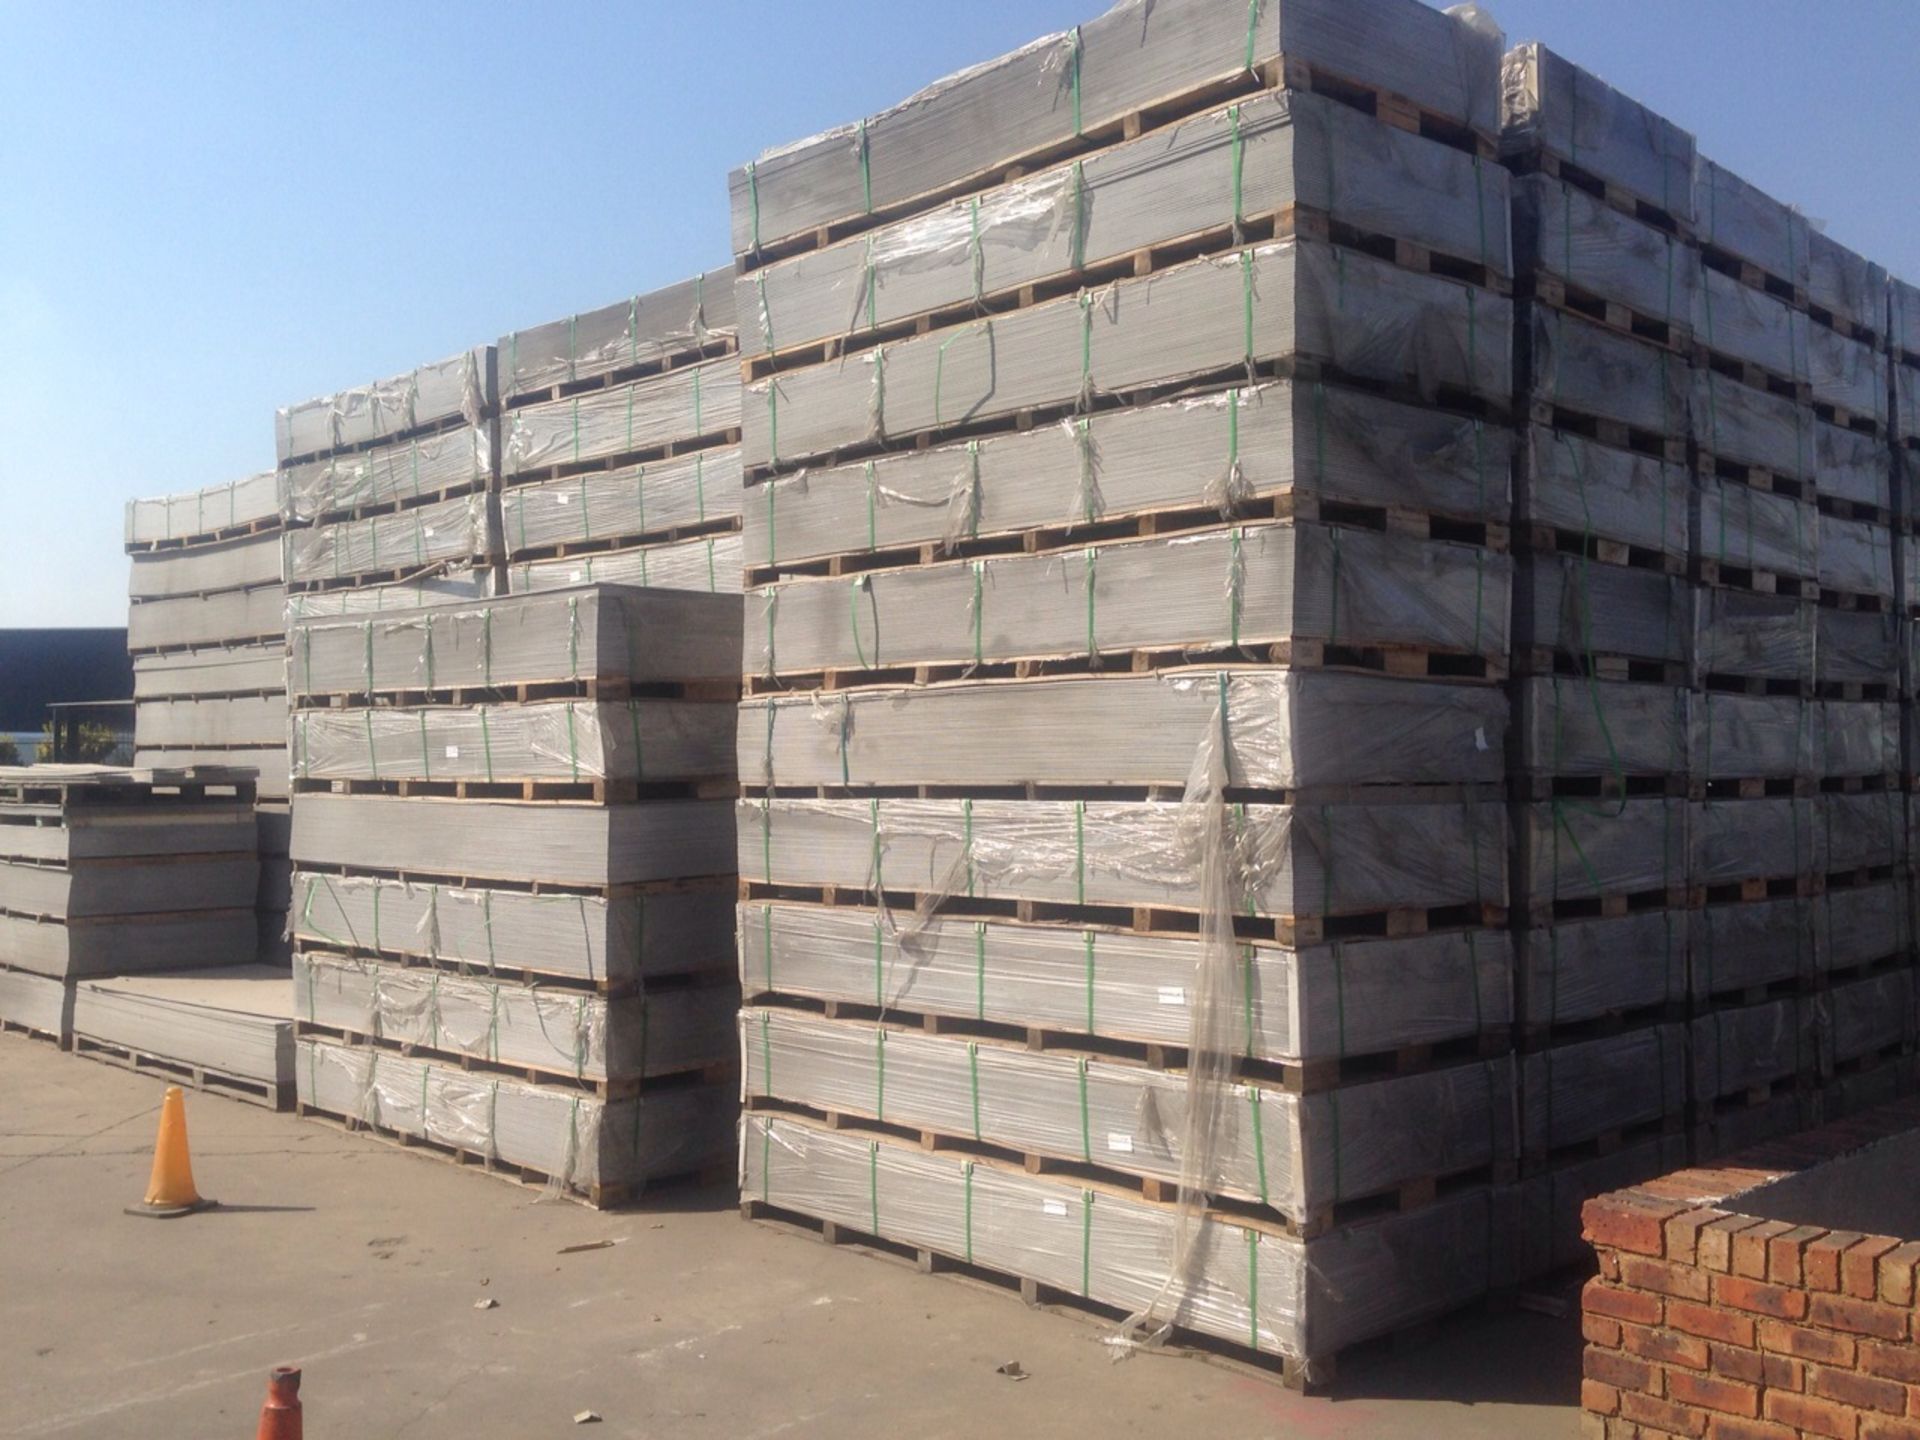 B GRADE FIBRE CEMENT BOARD 9MM TAPERED EDGE 3000 X 1200 (15 PALLETS - 35 BOARDS / PALLET) - Image 2 of 3